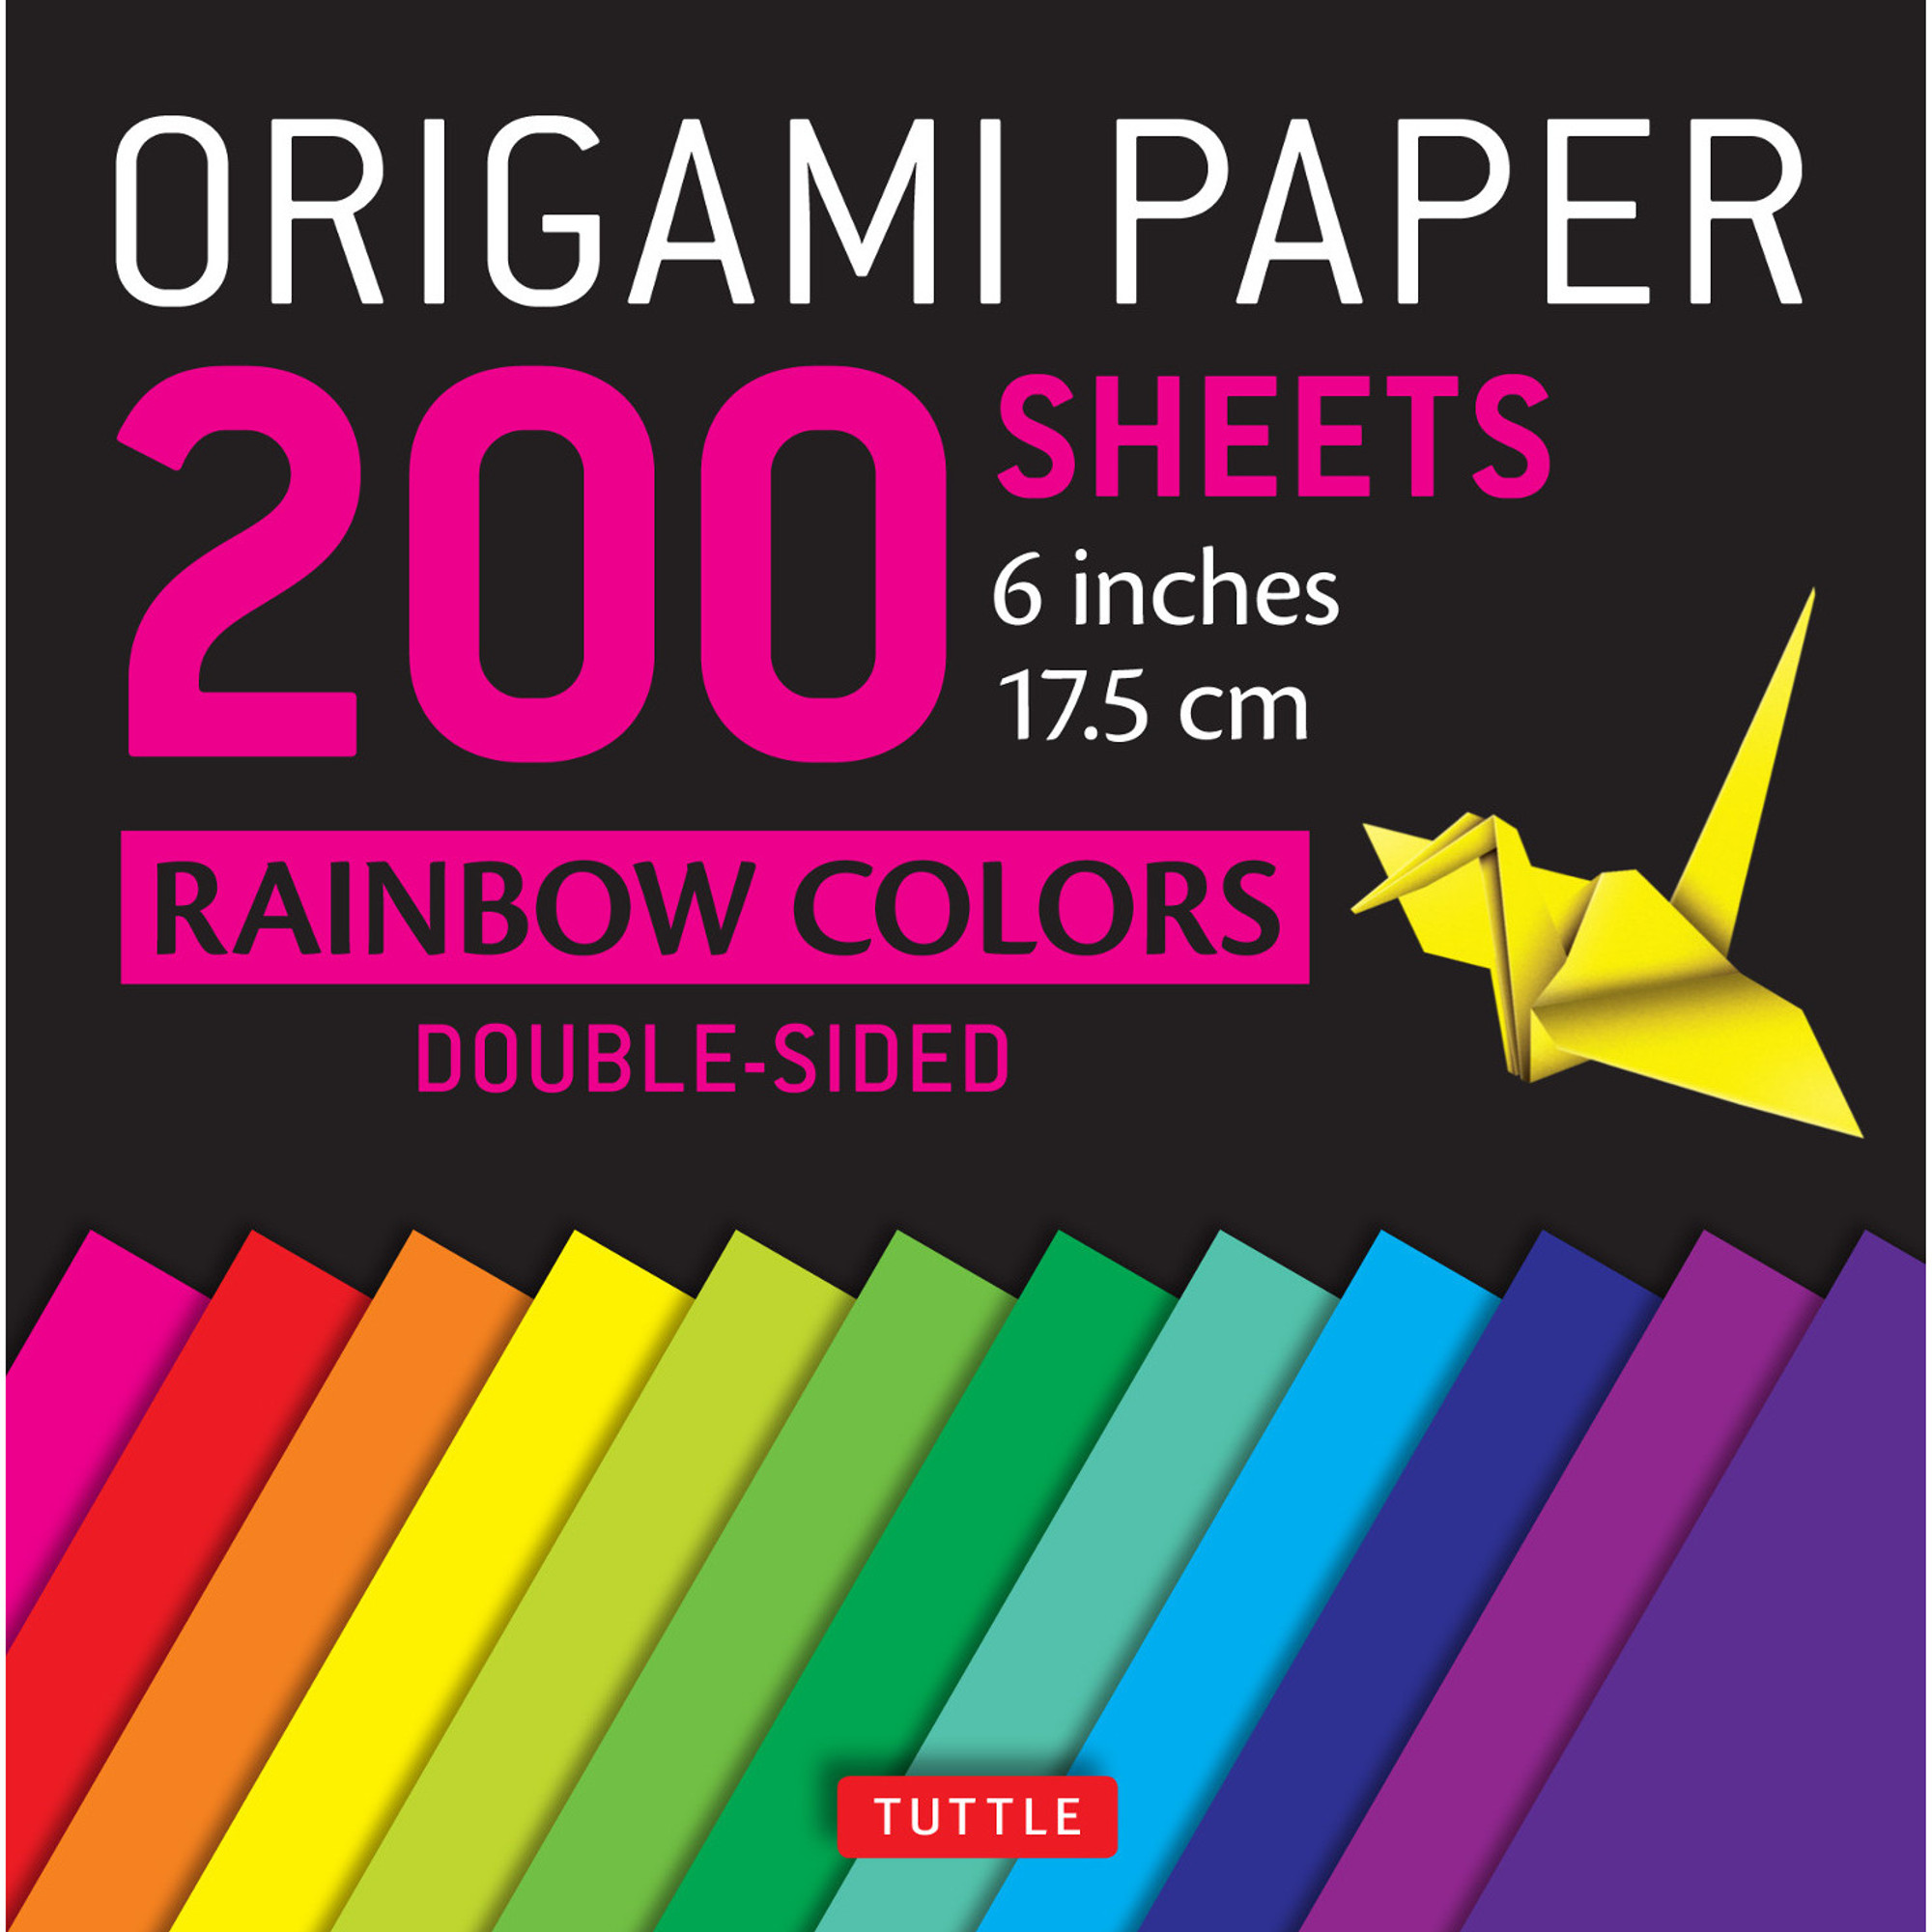 Origami Books: Color-Gami : Color and Fold Your Way to Calm (Mixed media  product)